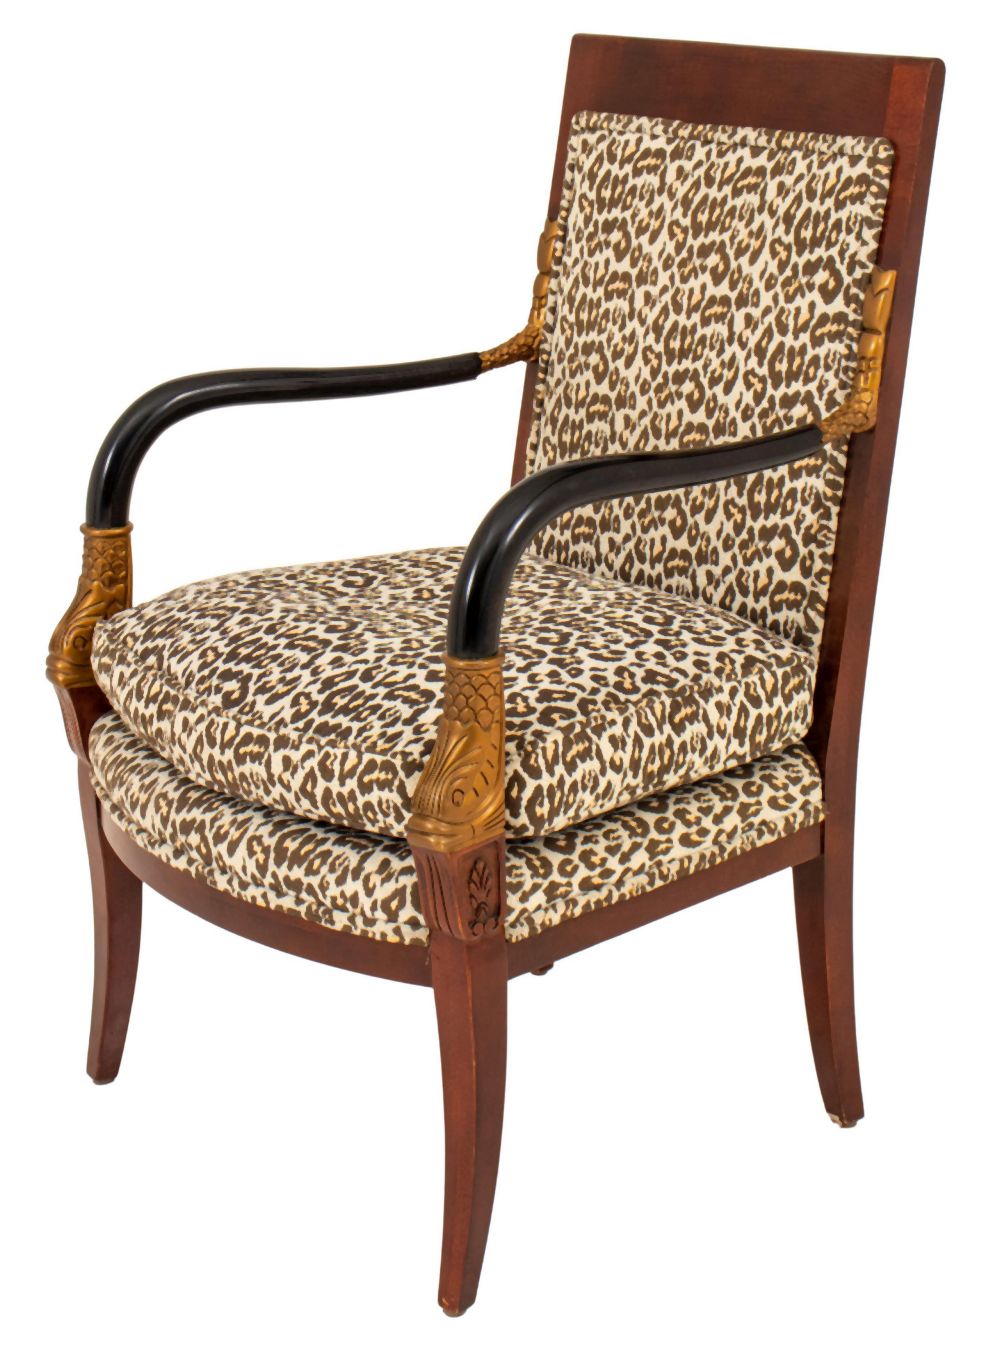 FRENCH CONSULAT STYLE ARM CHAIR 35fff8